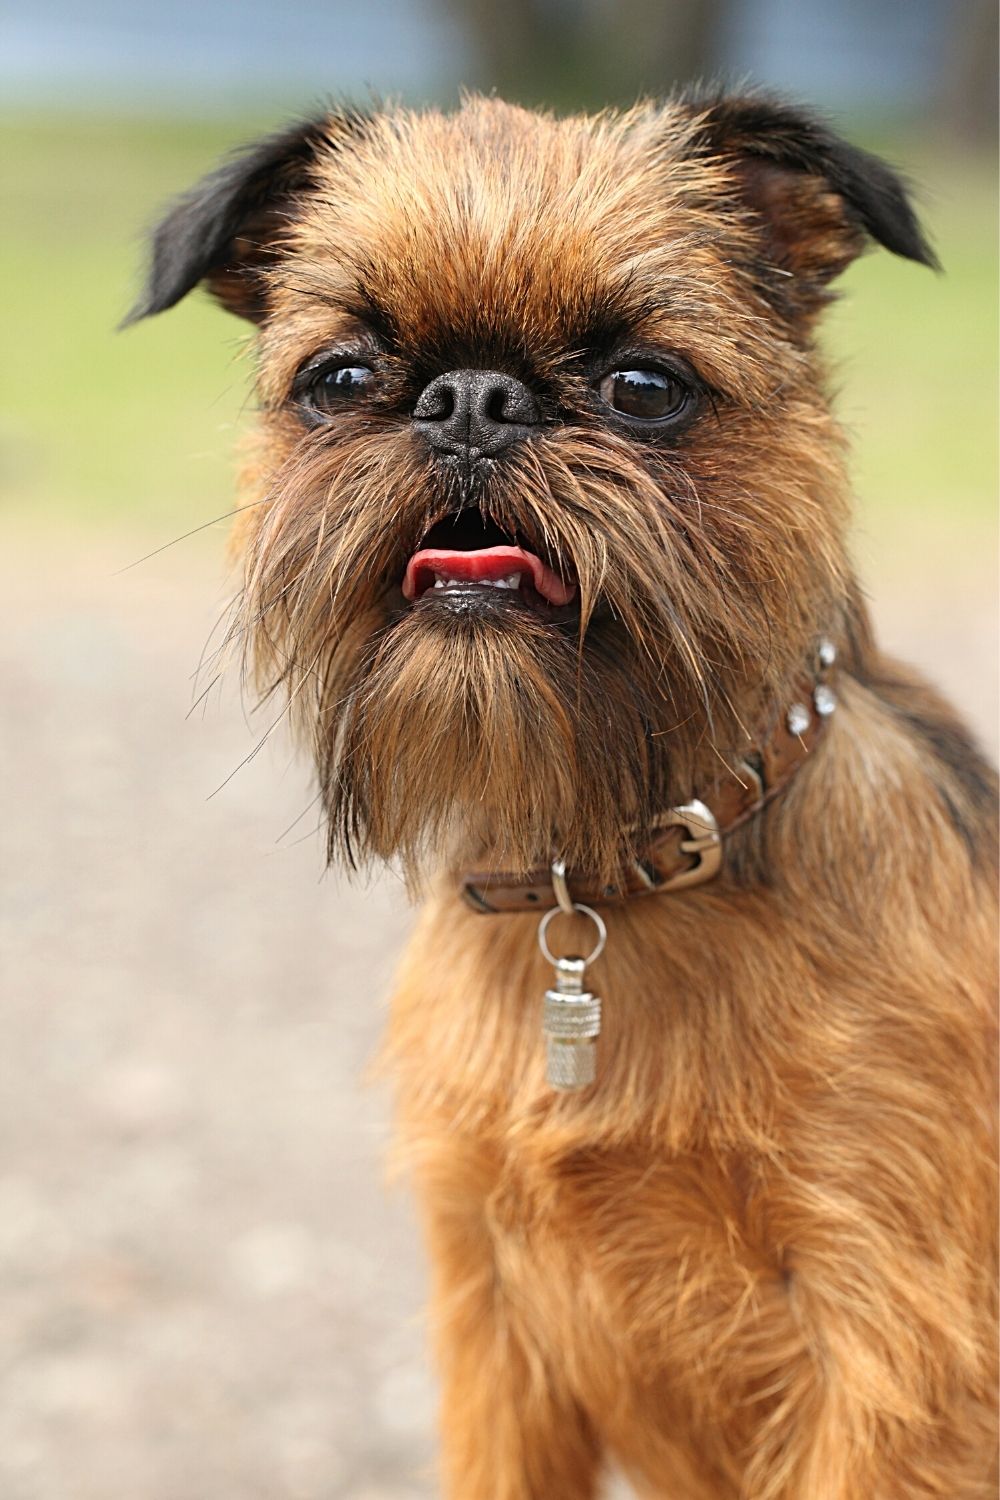 The Brussels Griffon looks like the Ewoks from Star Wars because it is from this breed of dog the characters were designed from